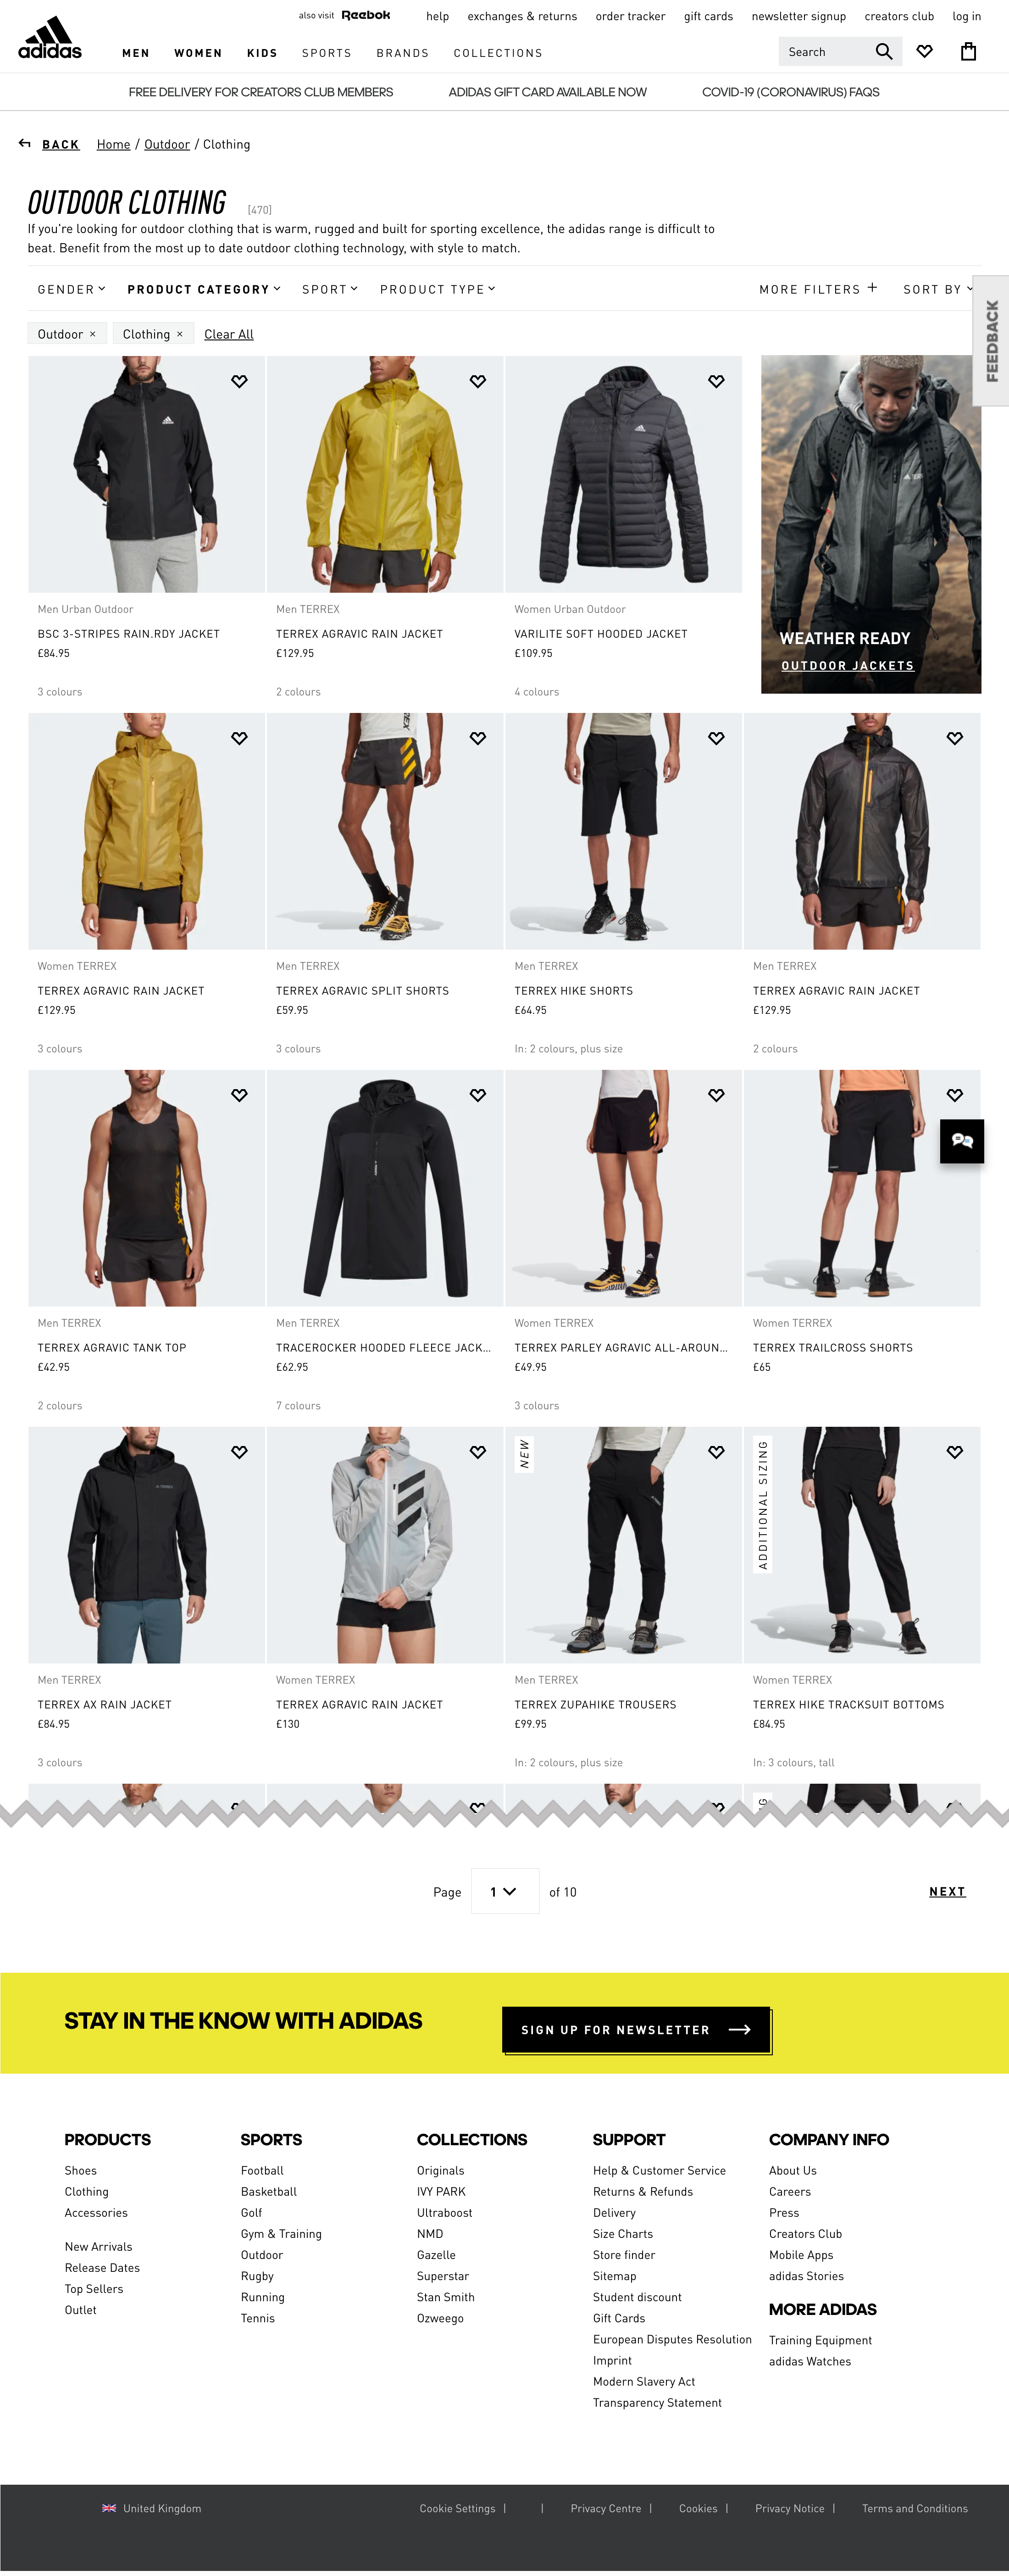 Adidas' Product List 417 of 774 Product List – Institute